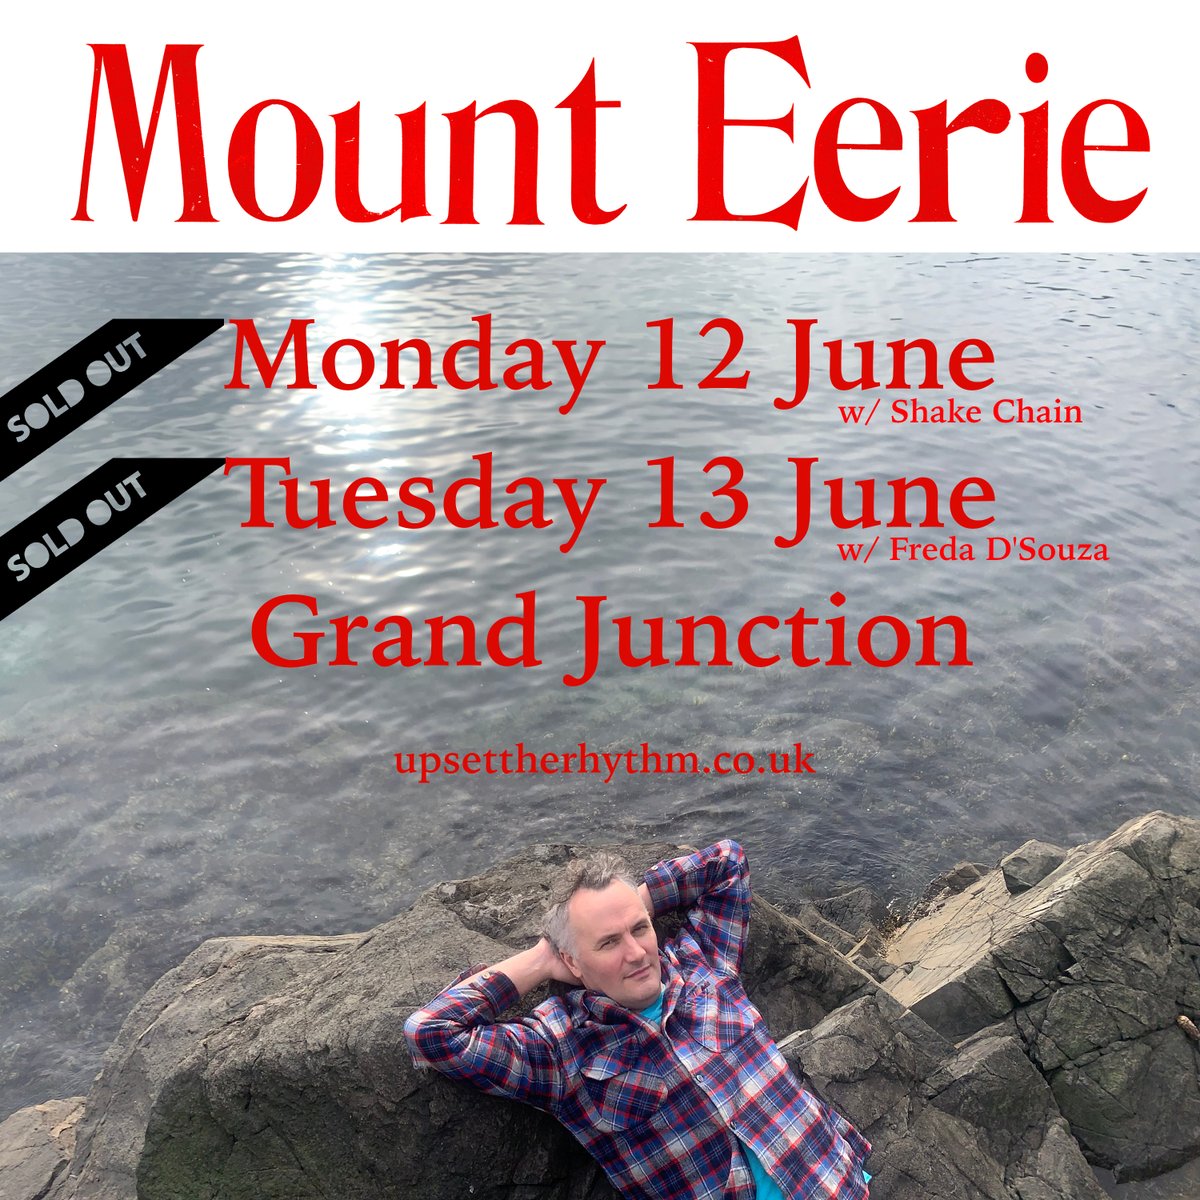 Good morning! Tonight & tomorrow night’s Mount Eerie concerts at Grand Junction are both SOLD OUT, no tickets on the door FYI. Live music from 8.15pm each day, see you there London, it's going to be terrific! UTR x @PWElverum @grandjunctionW2